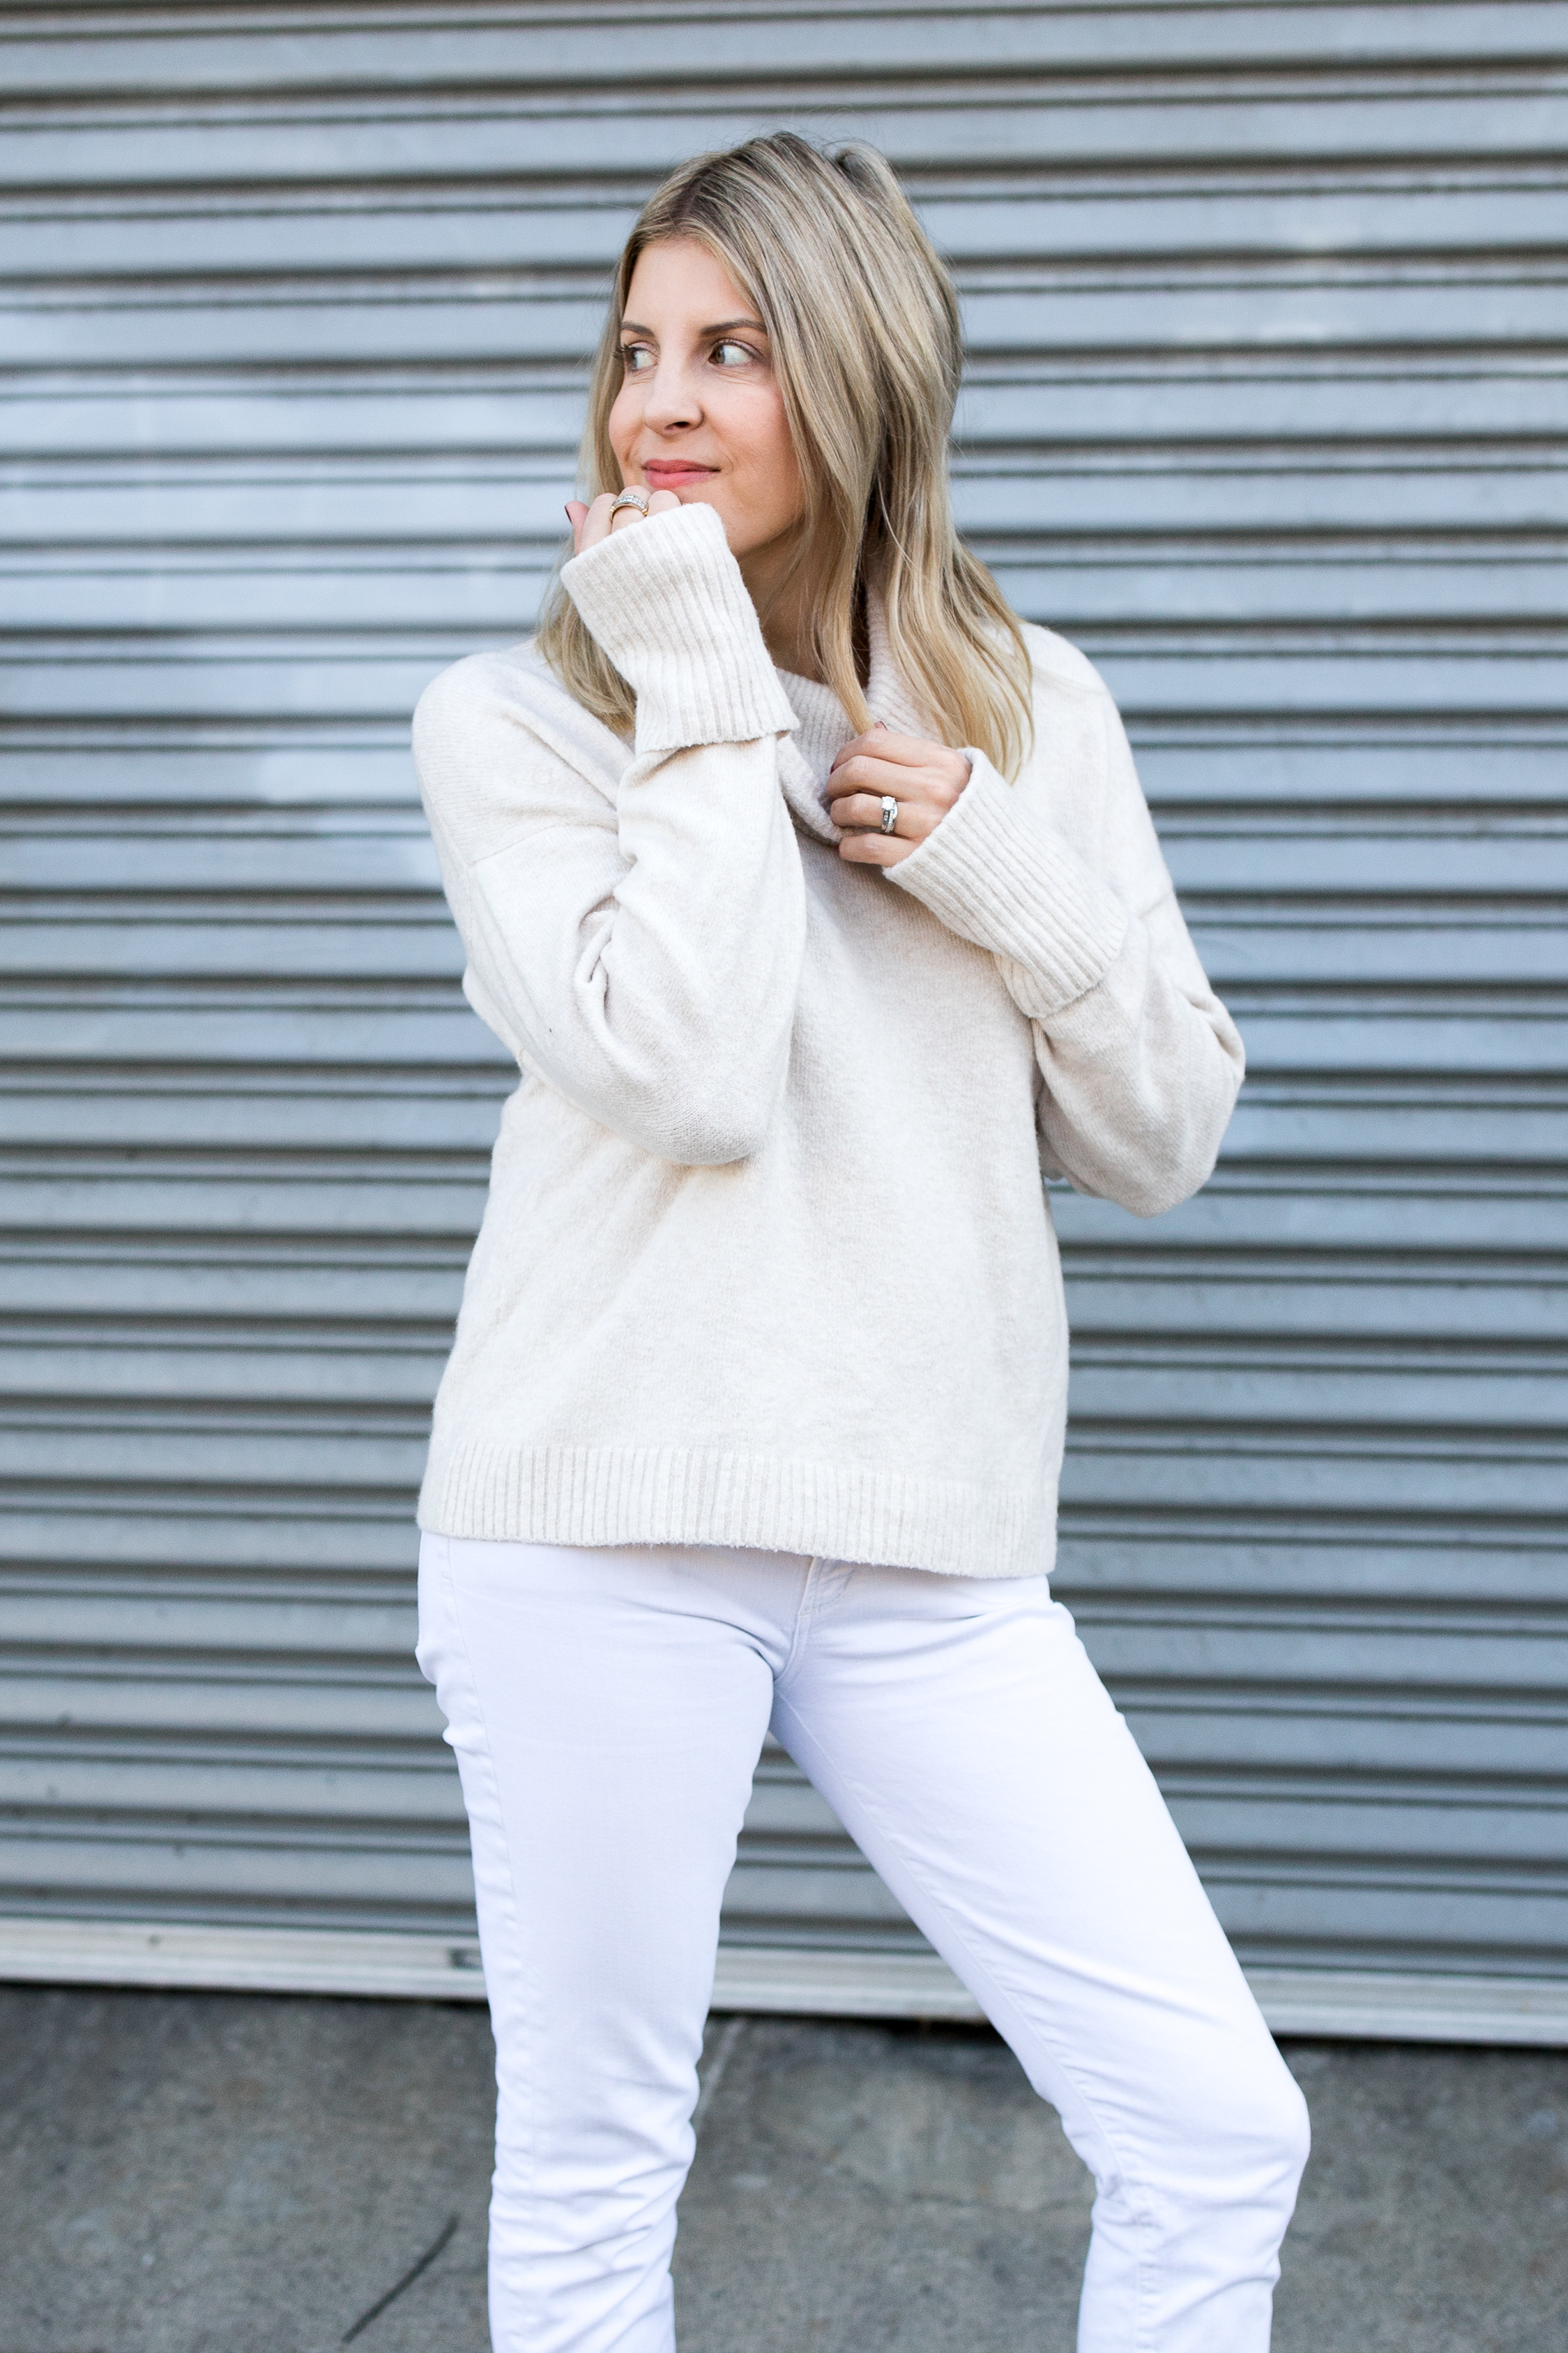 White Jeans After Labor Day6 · Abby Savvy